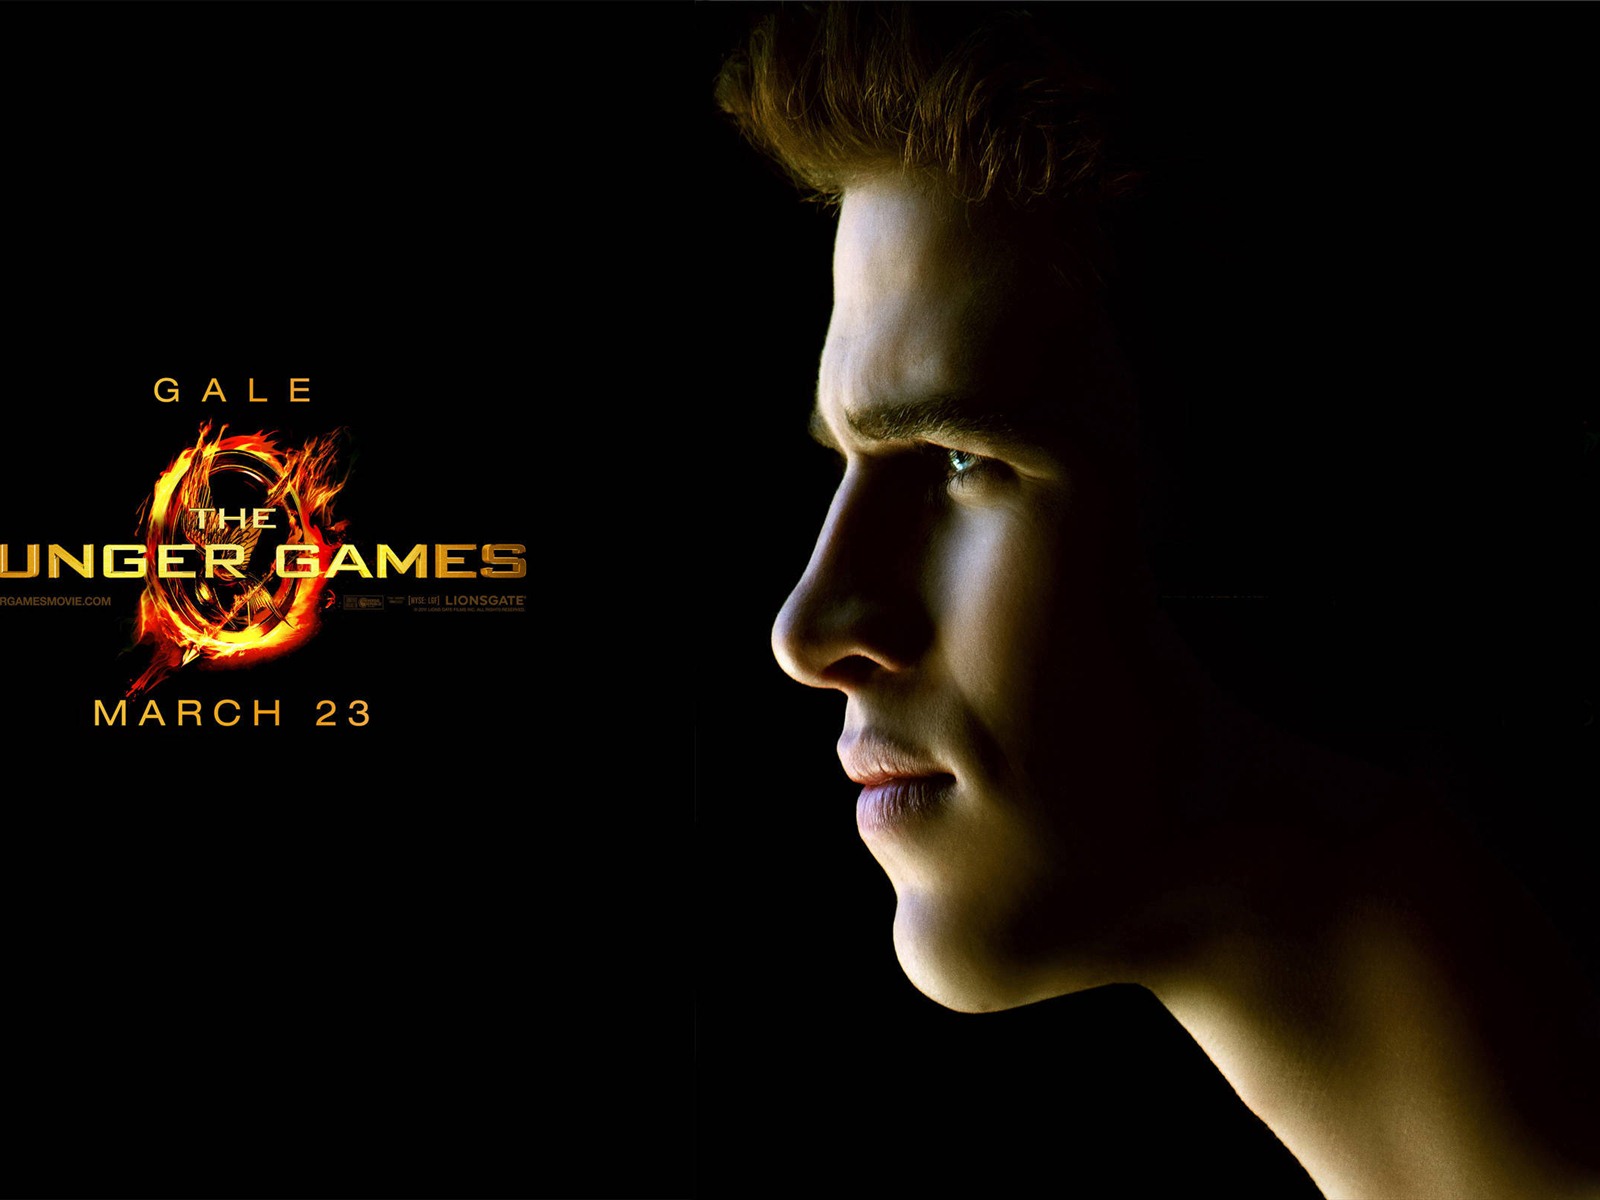 The Hunger Games HD wallpapers #4 - 1600x1200